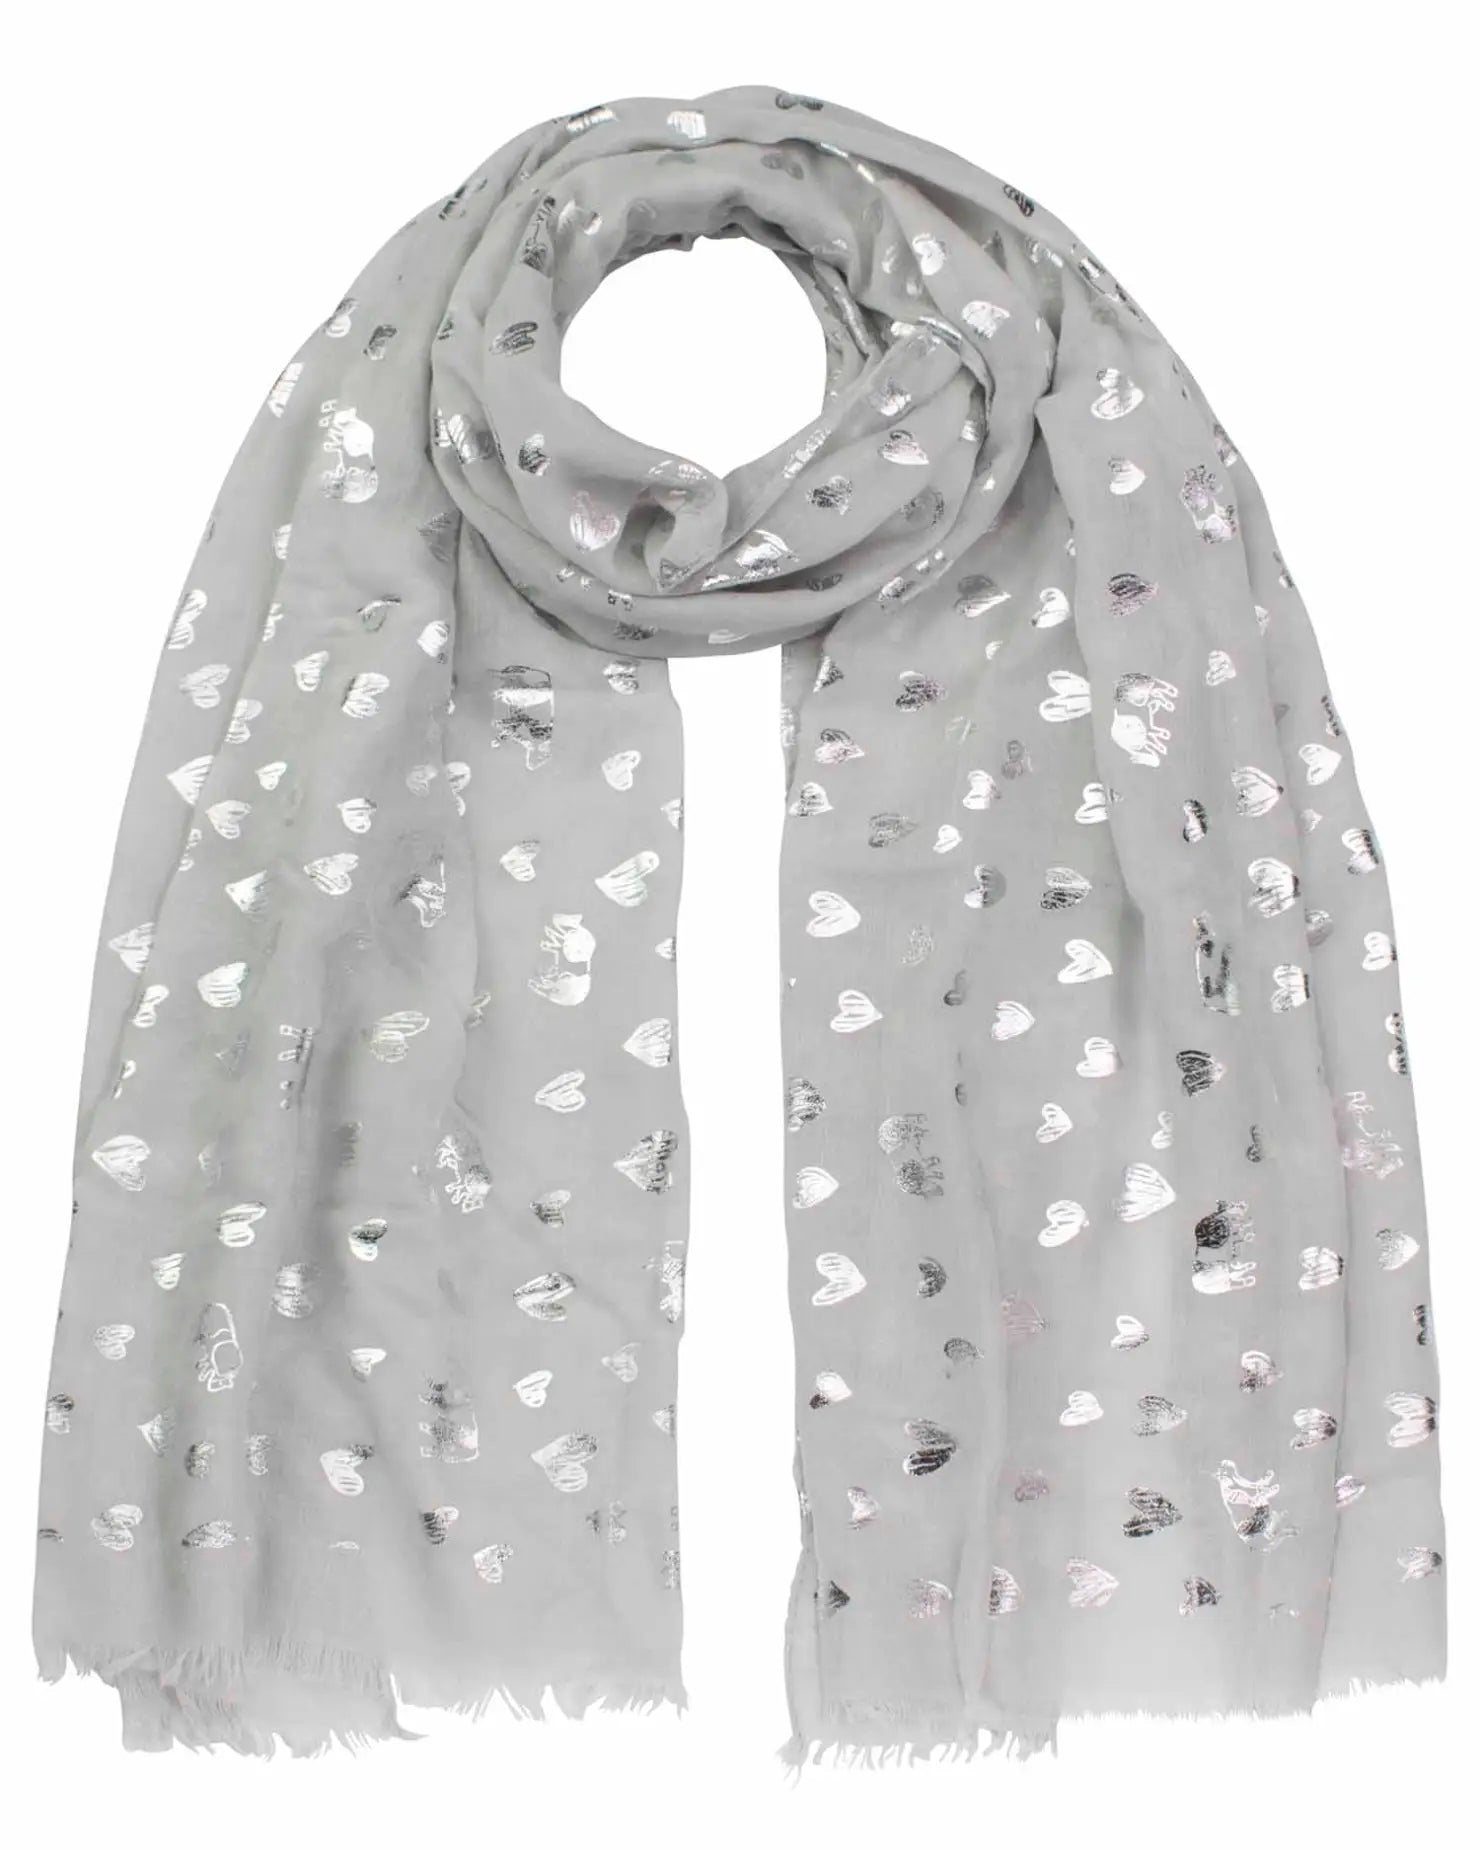 Heart & Cow Print Silver Foil Oversized Scarf with Hearts